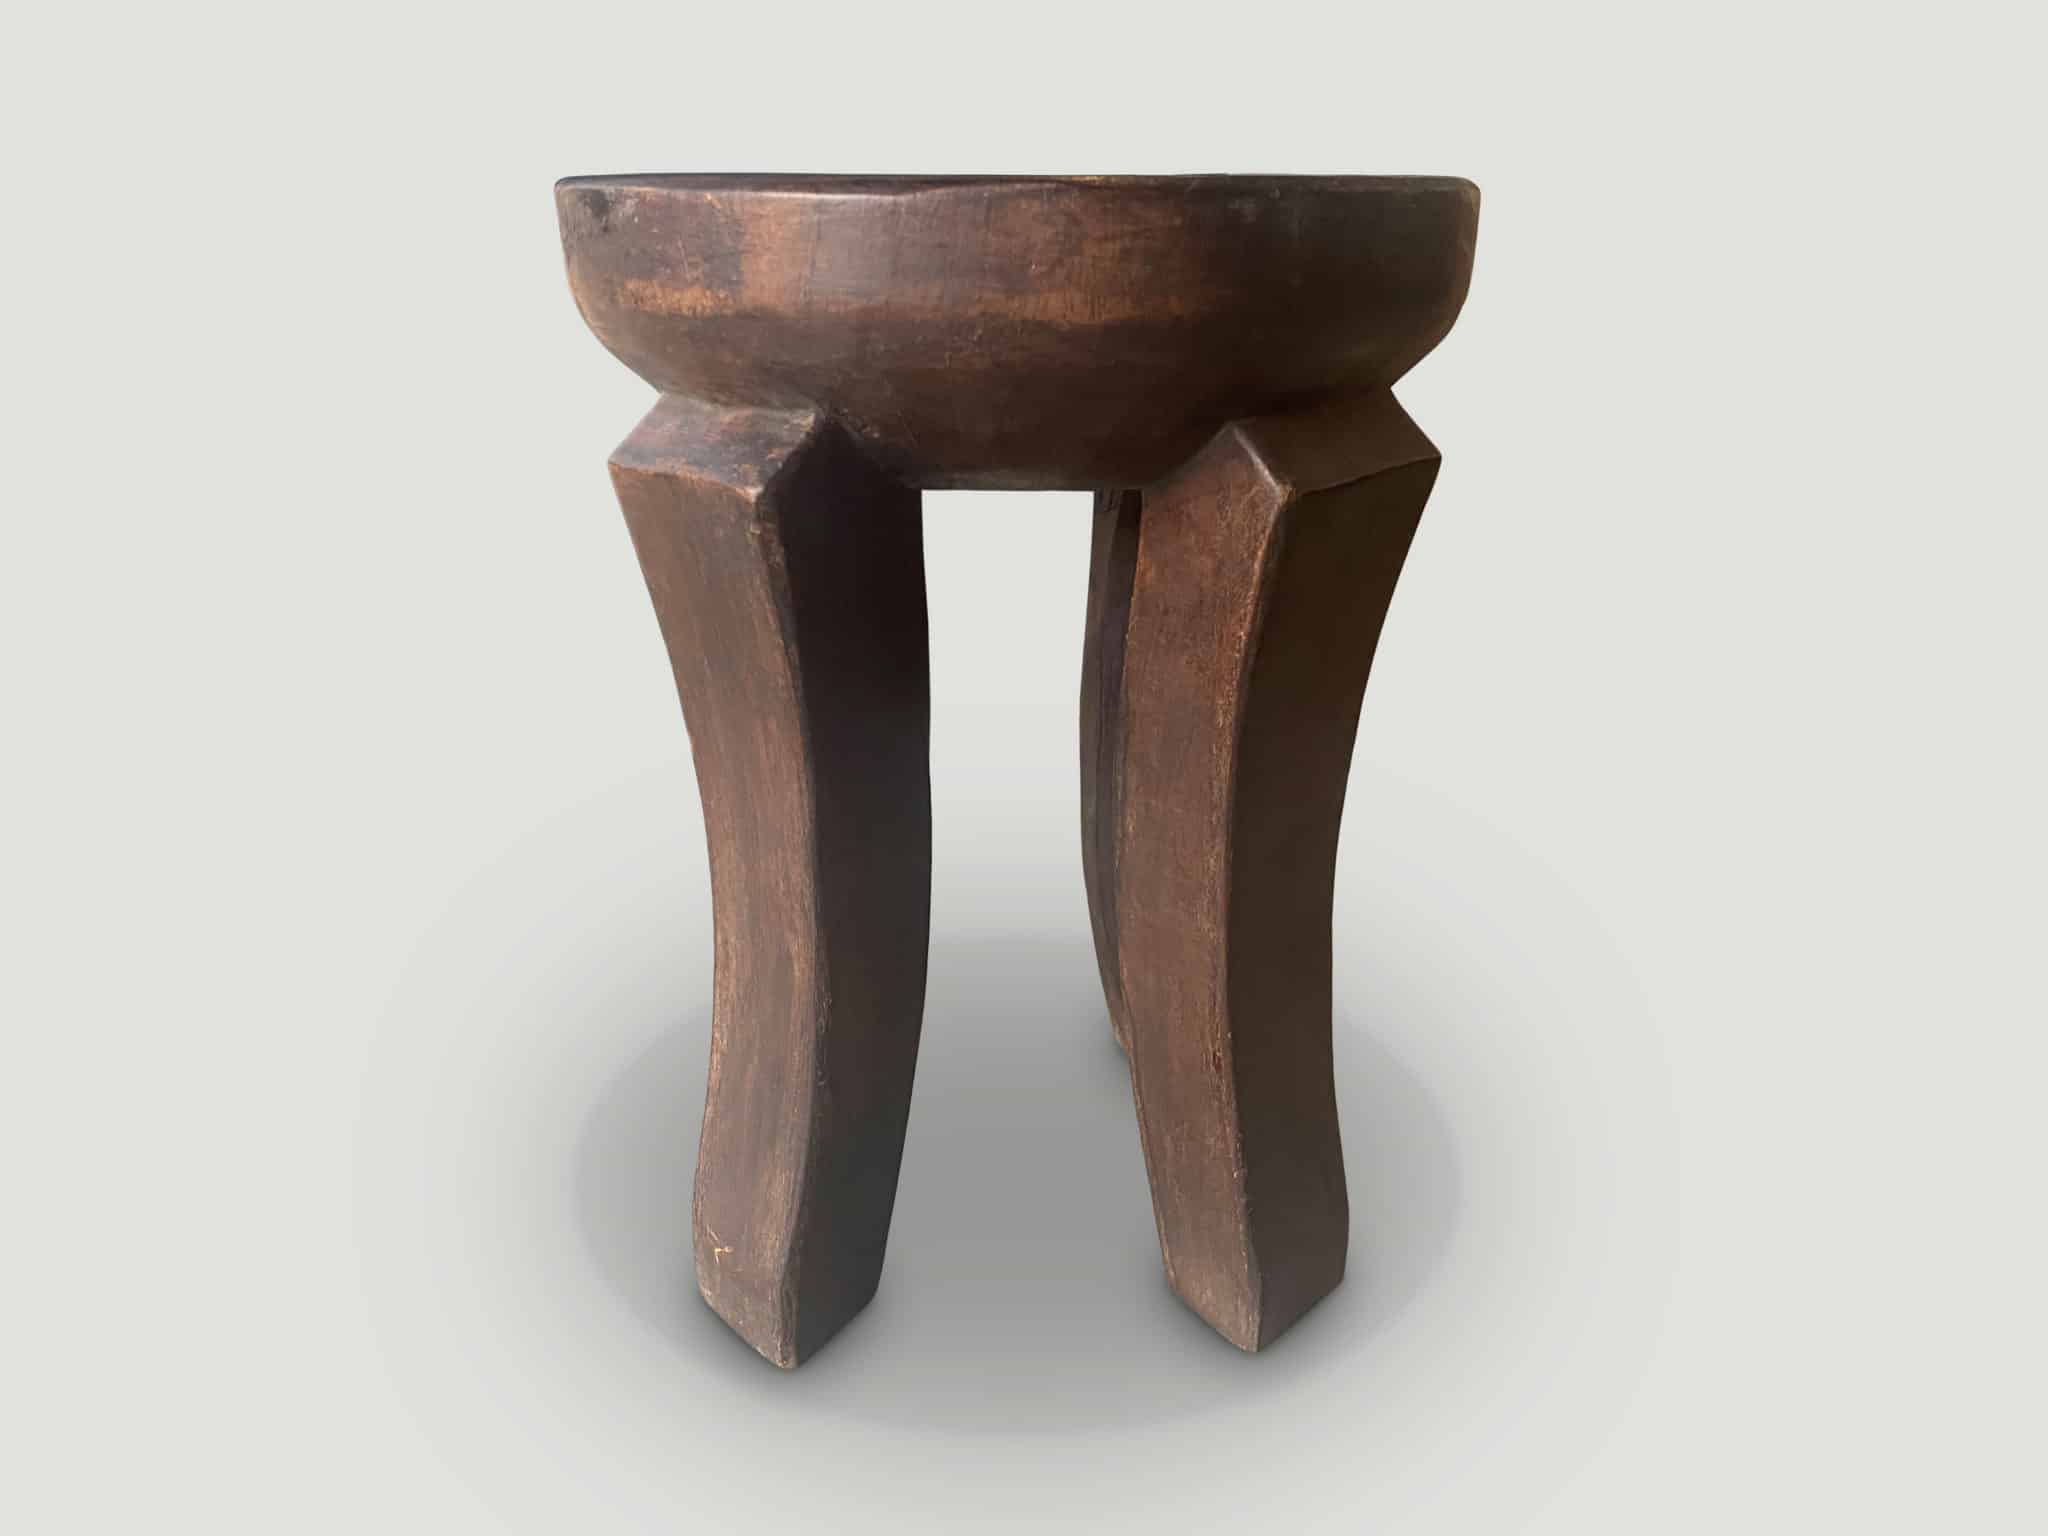 African side table or stool